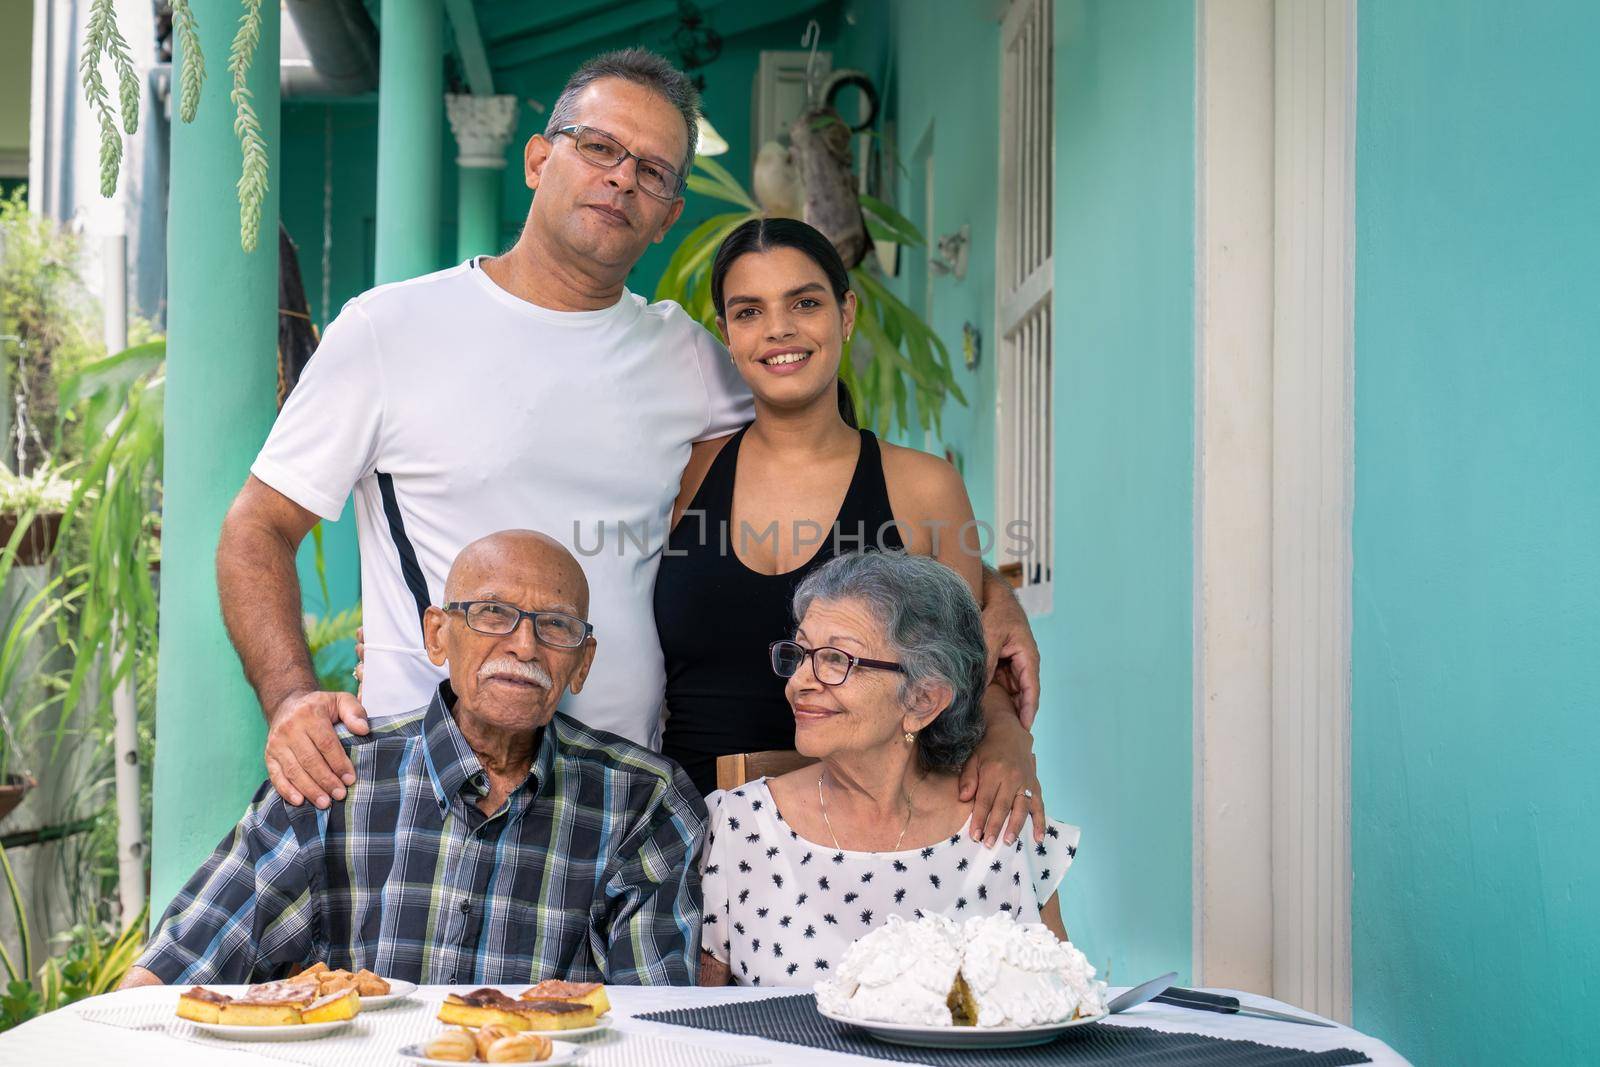 Elderly couple wearing eyeglasses sitting at a table and a man and a young woman standing behind the elderly